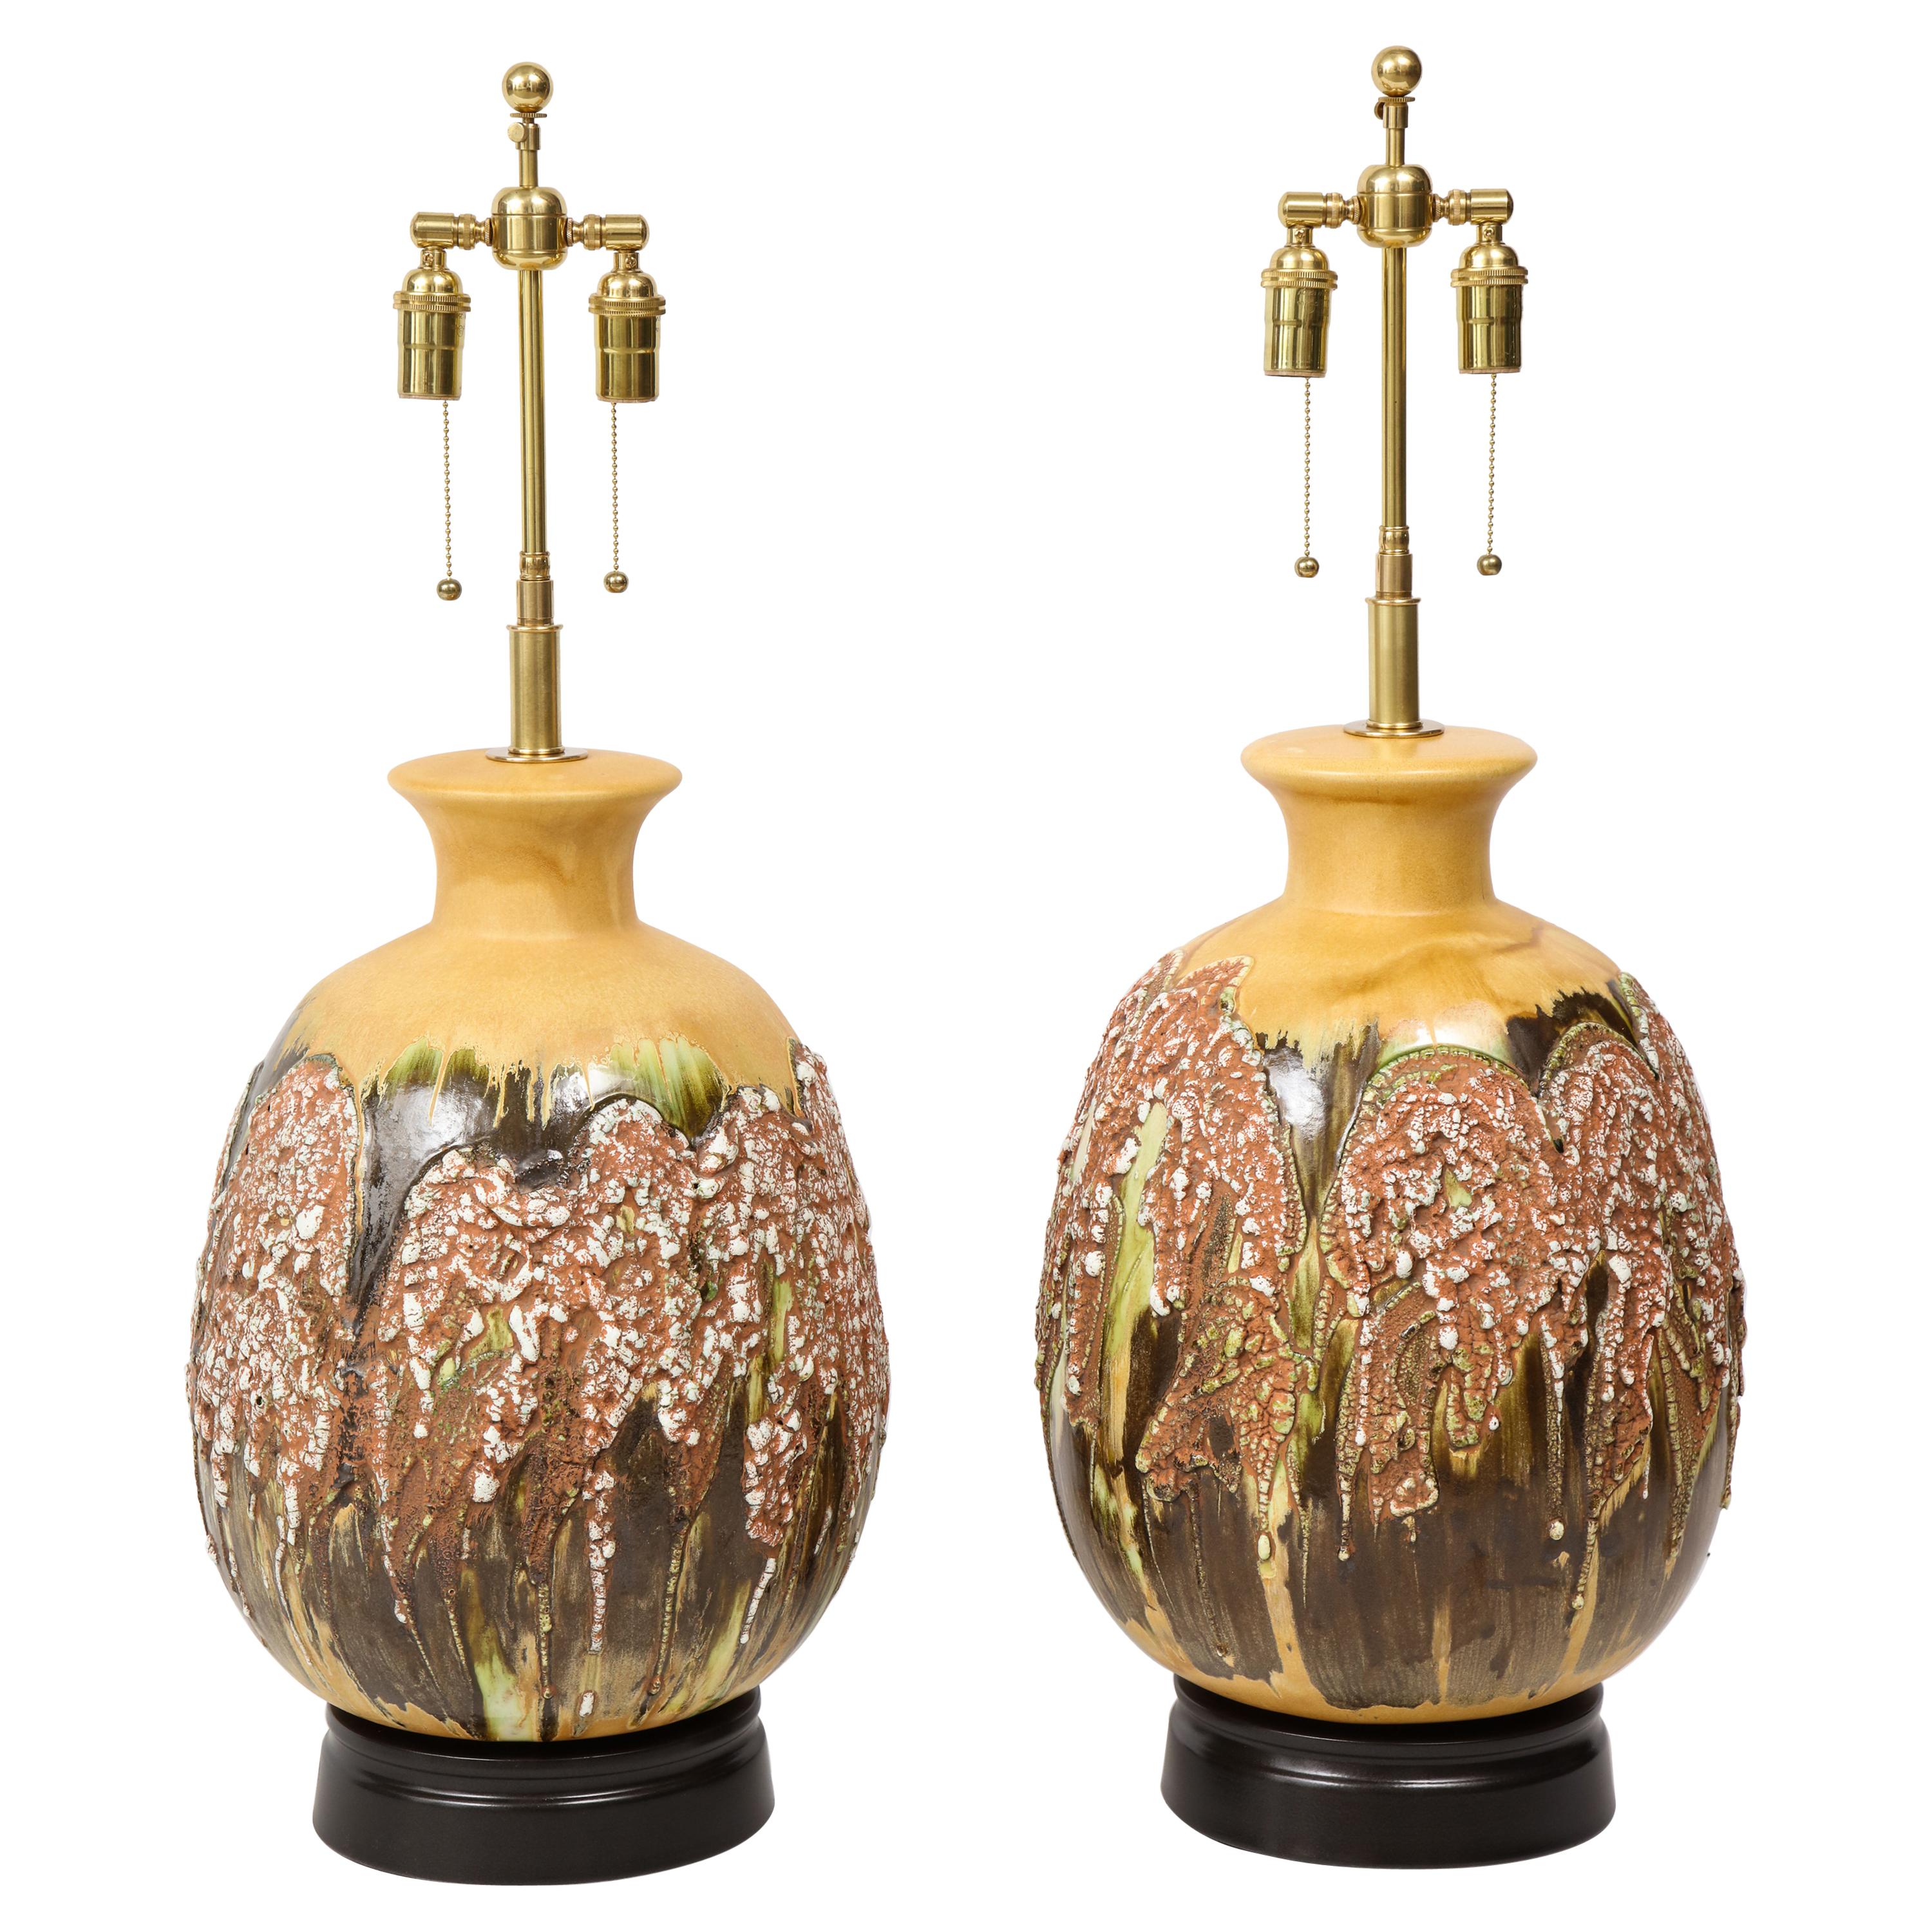 Pair of Extra Large Italian Volcanic Glazed Ceramic Lamps For Sale